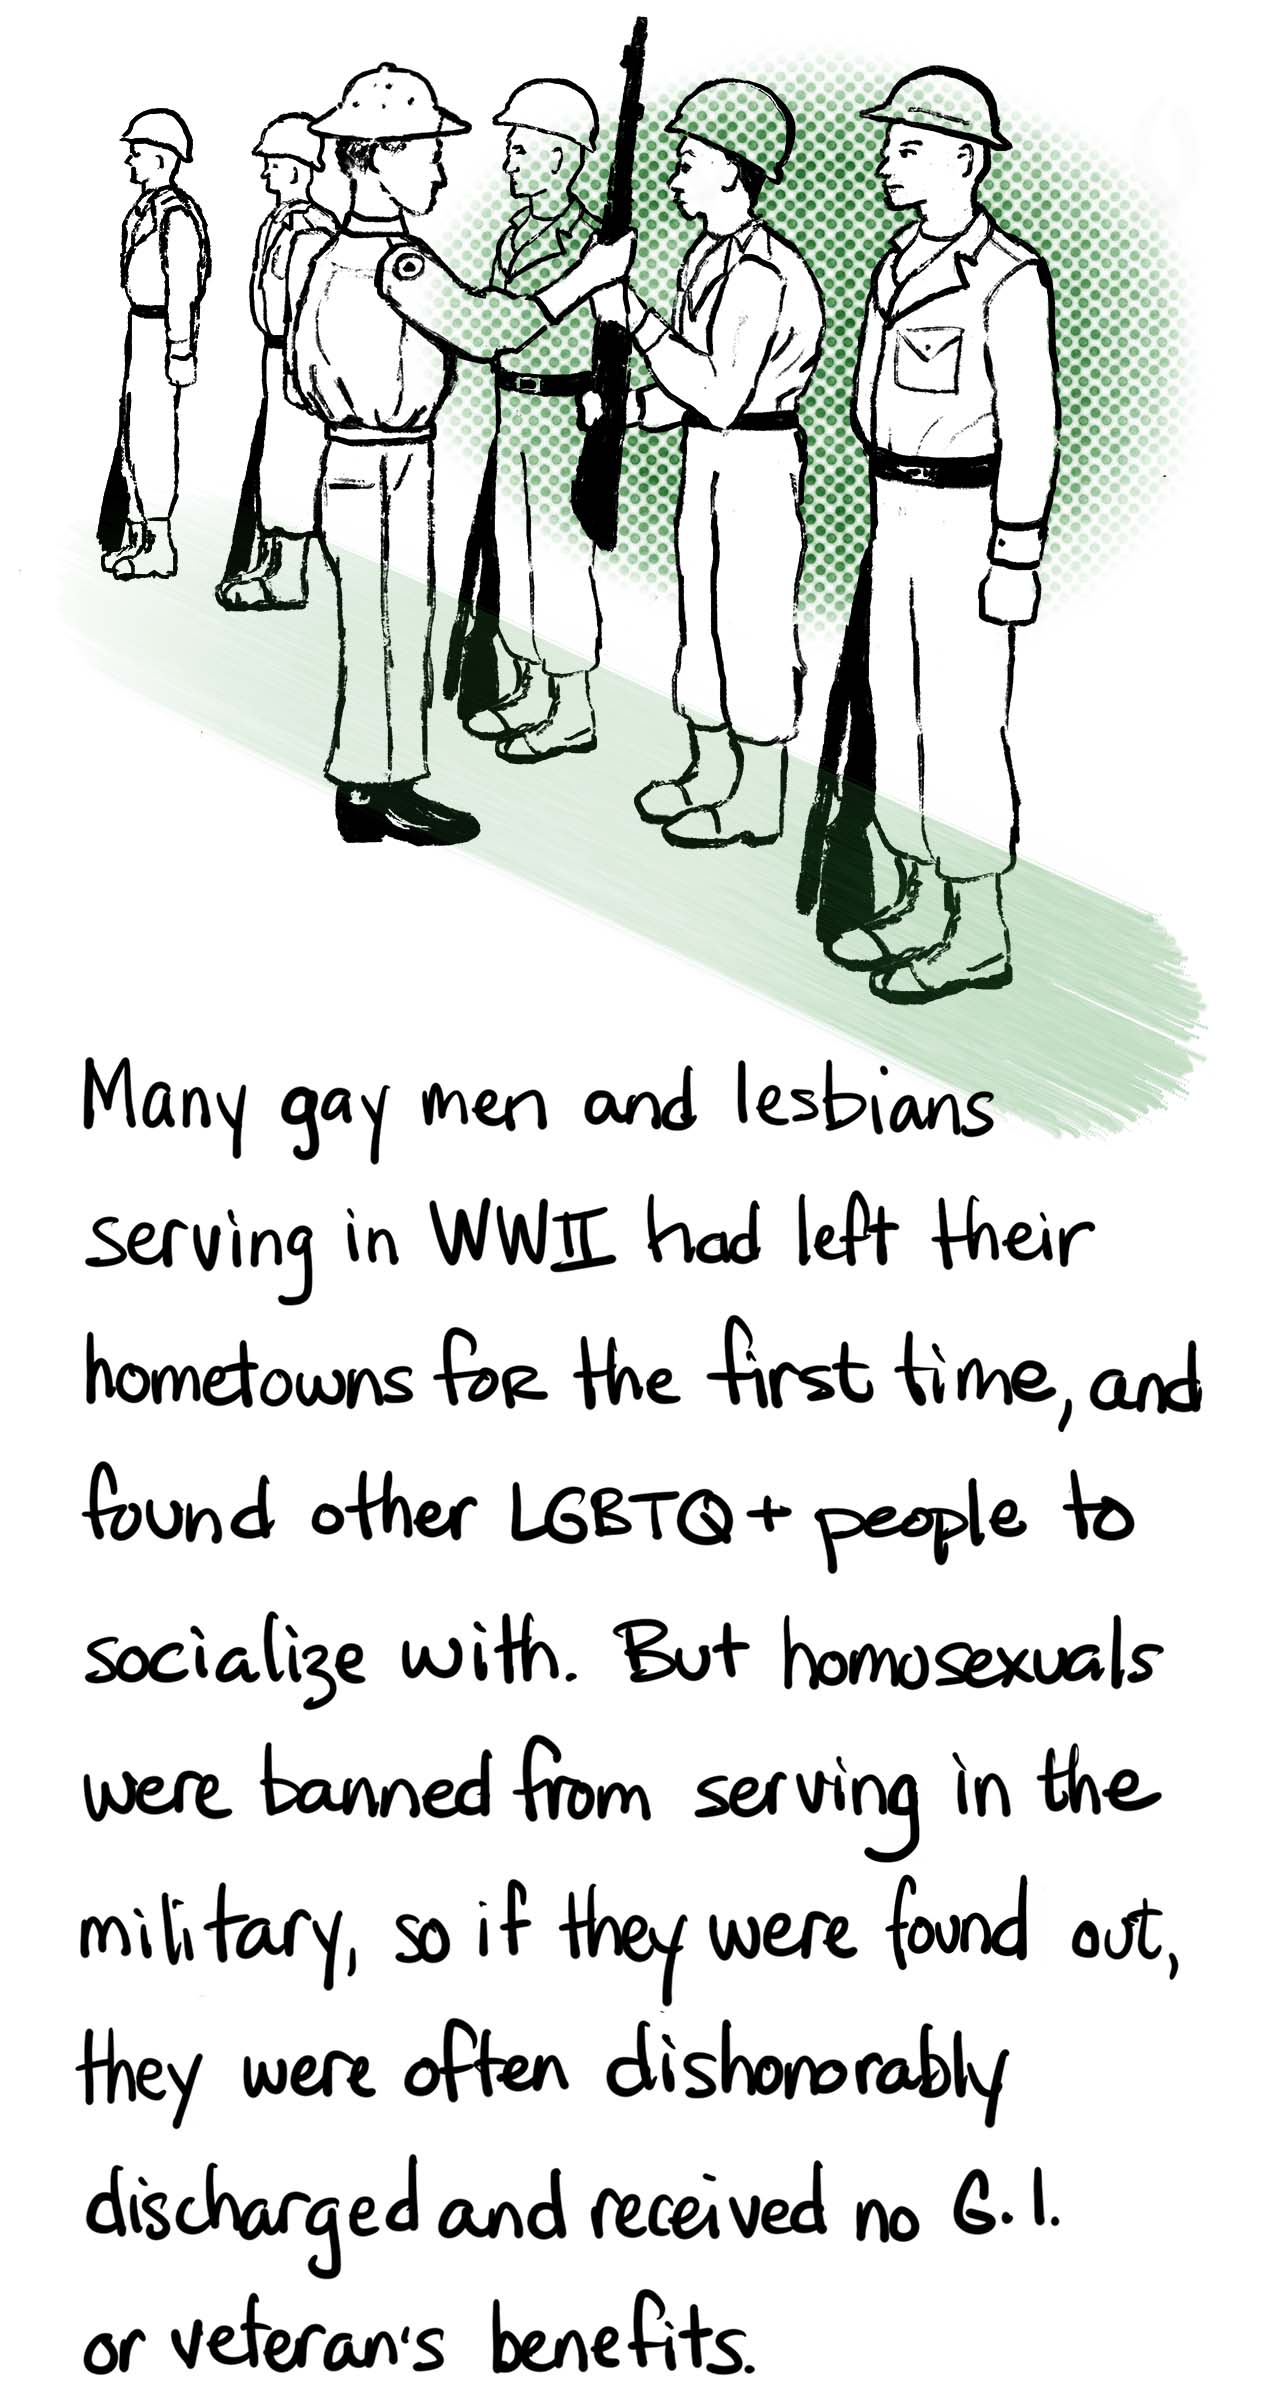 Image: Soldiers standing in attention. Text: Many gay men and lesbians serving in WWII had left their hometowns for the first time, and finally found other LGBTQ+ people to socialize with. But homosexuals were banned from serving in the military, so if they were found out, they were often dishonorably discharged and received no G.I. or veteran’s benefits.